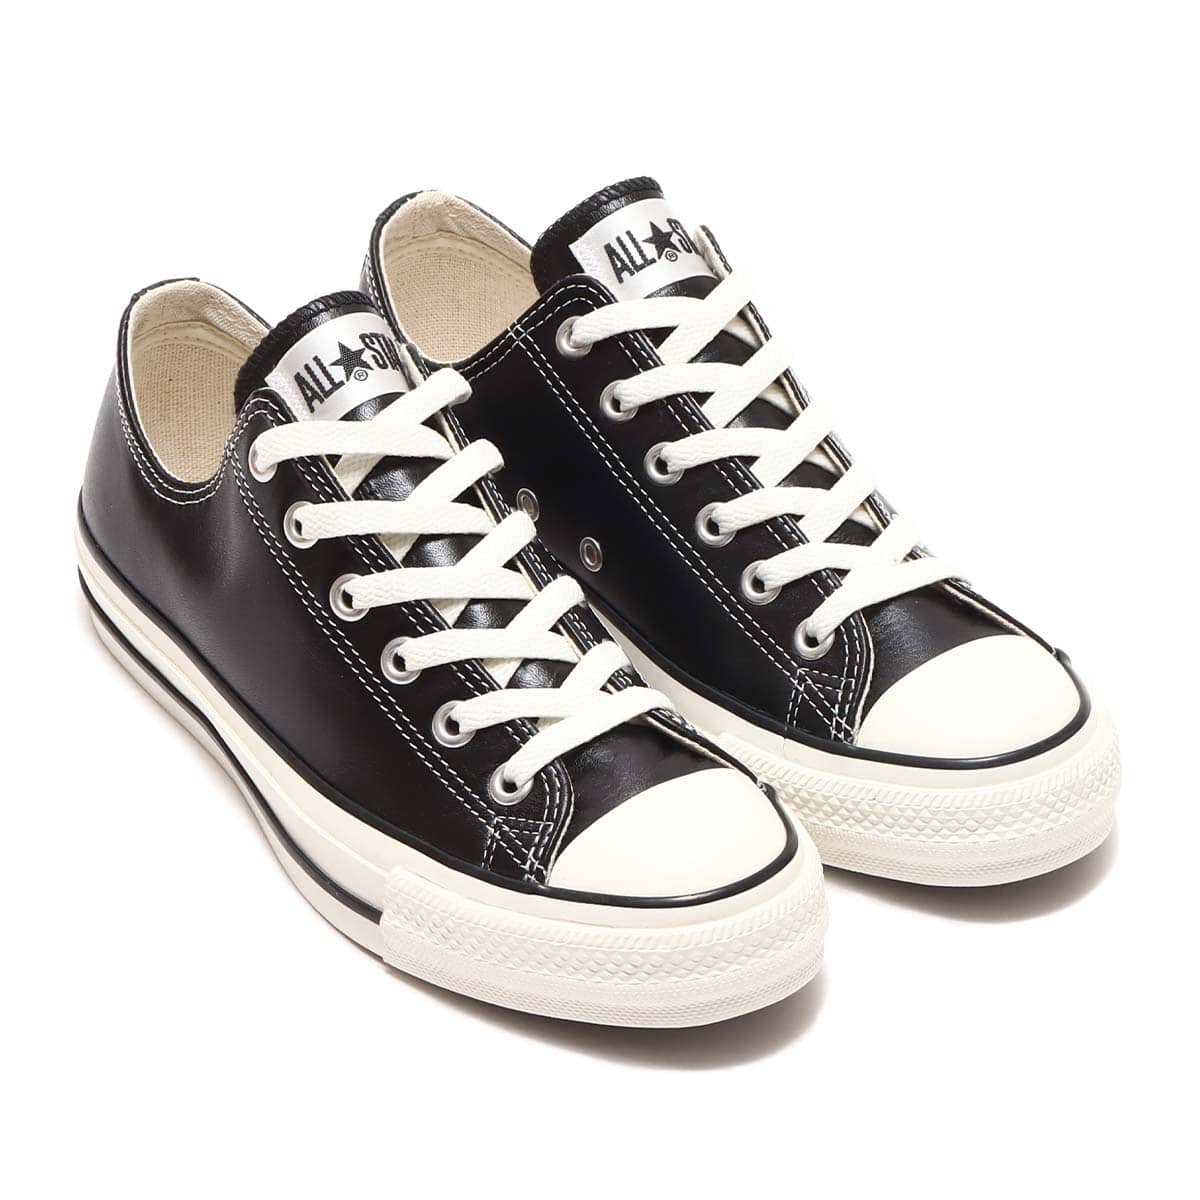 CONVERSE AS (R) OLIVE GREEN LEATHER OX